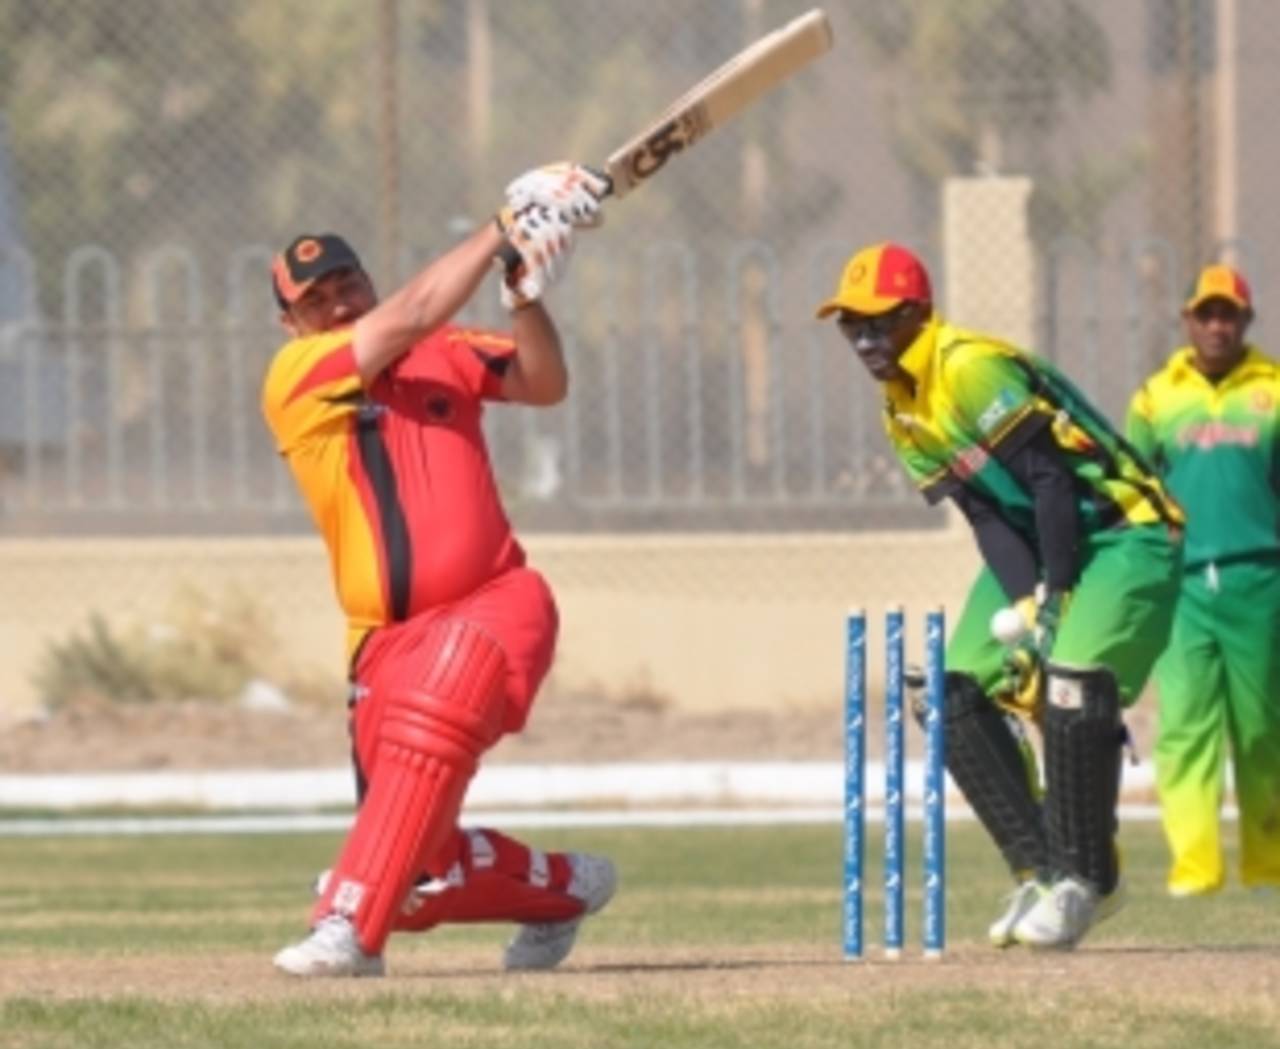 Shakeel Hassan is bowled by Patrick Haines, Germany v Vanuatu, WCL Division 8 Semi-Final, Kuwait City, November 11 2010